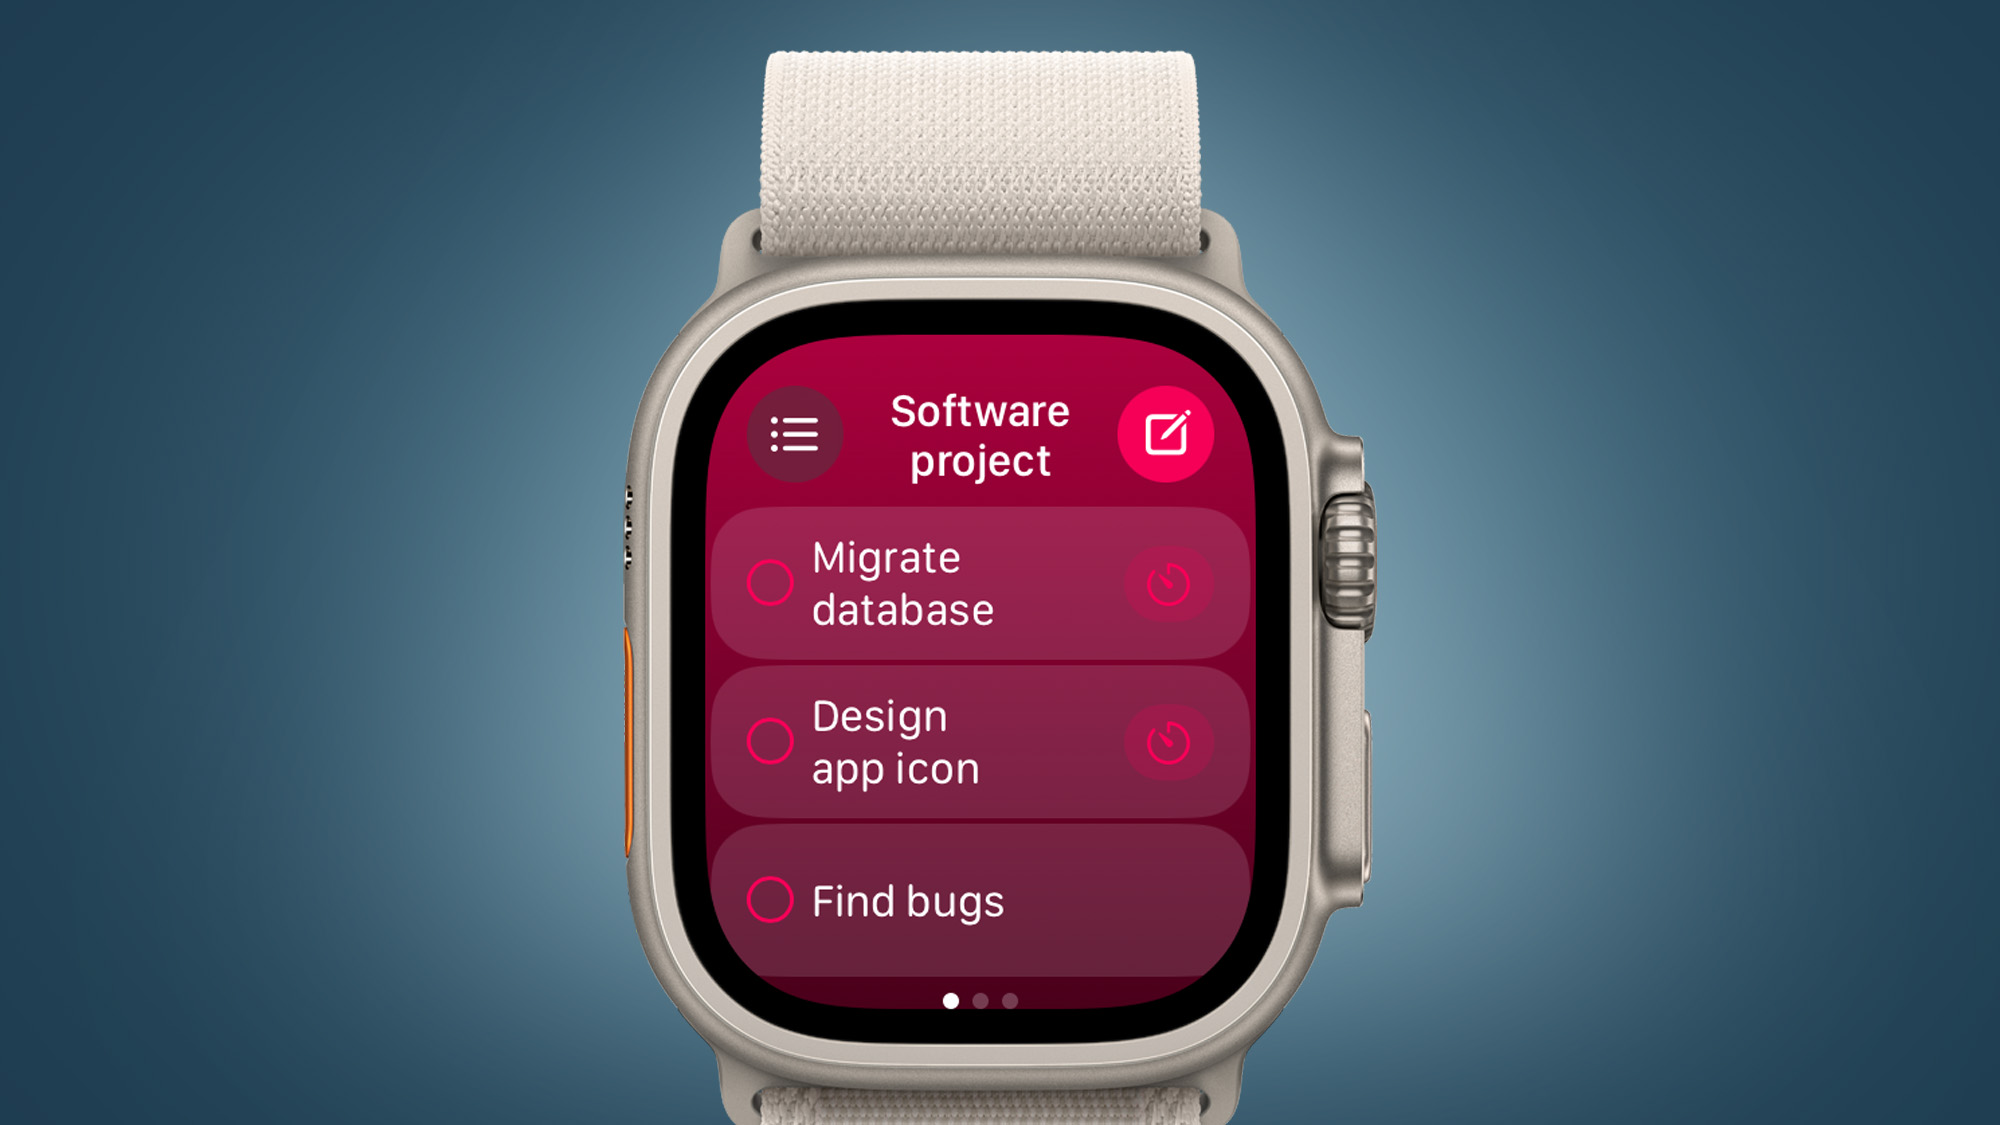 Apple Watch on a blue background showing the Planny app